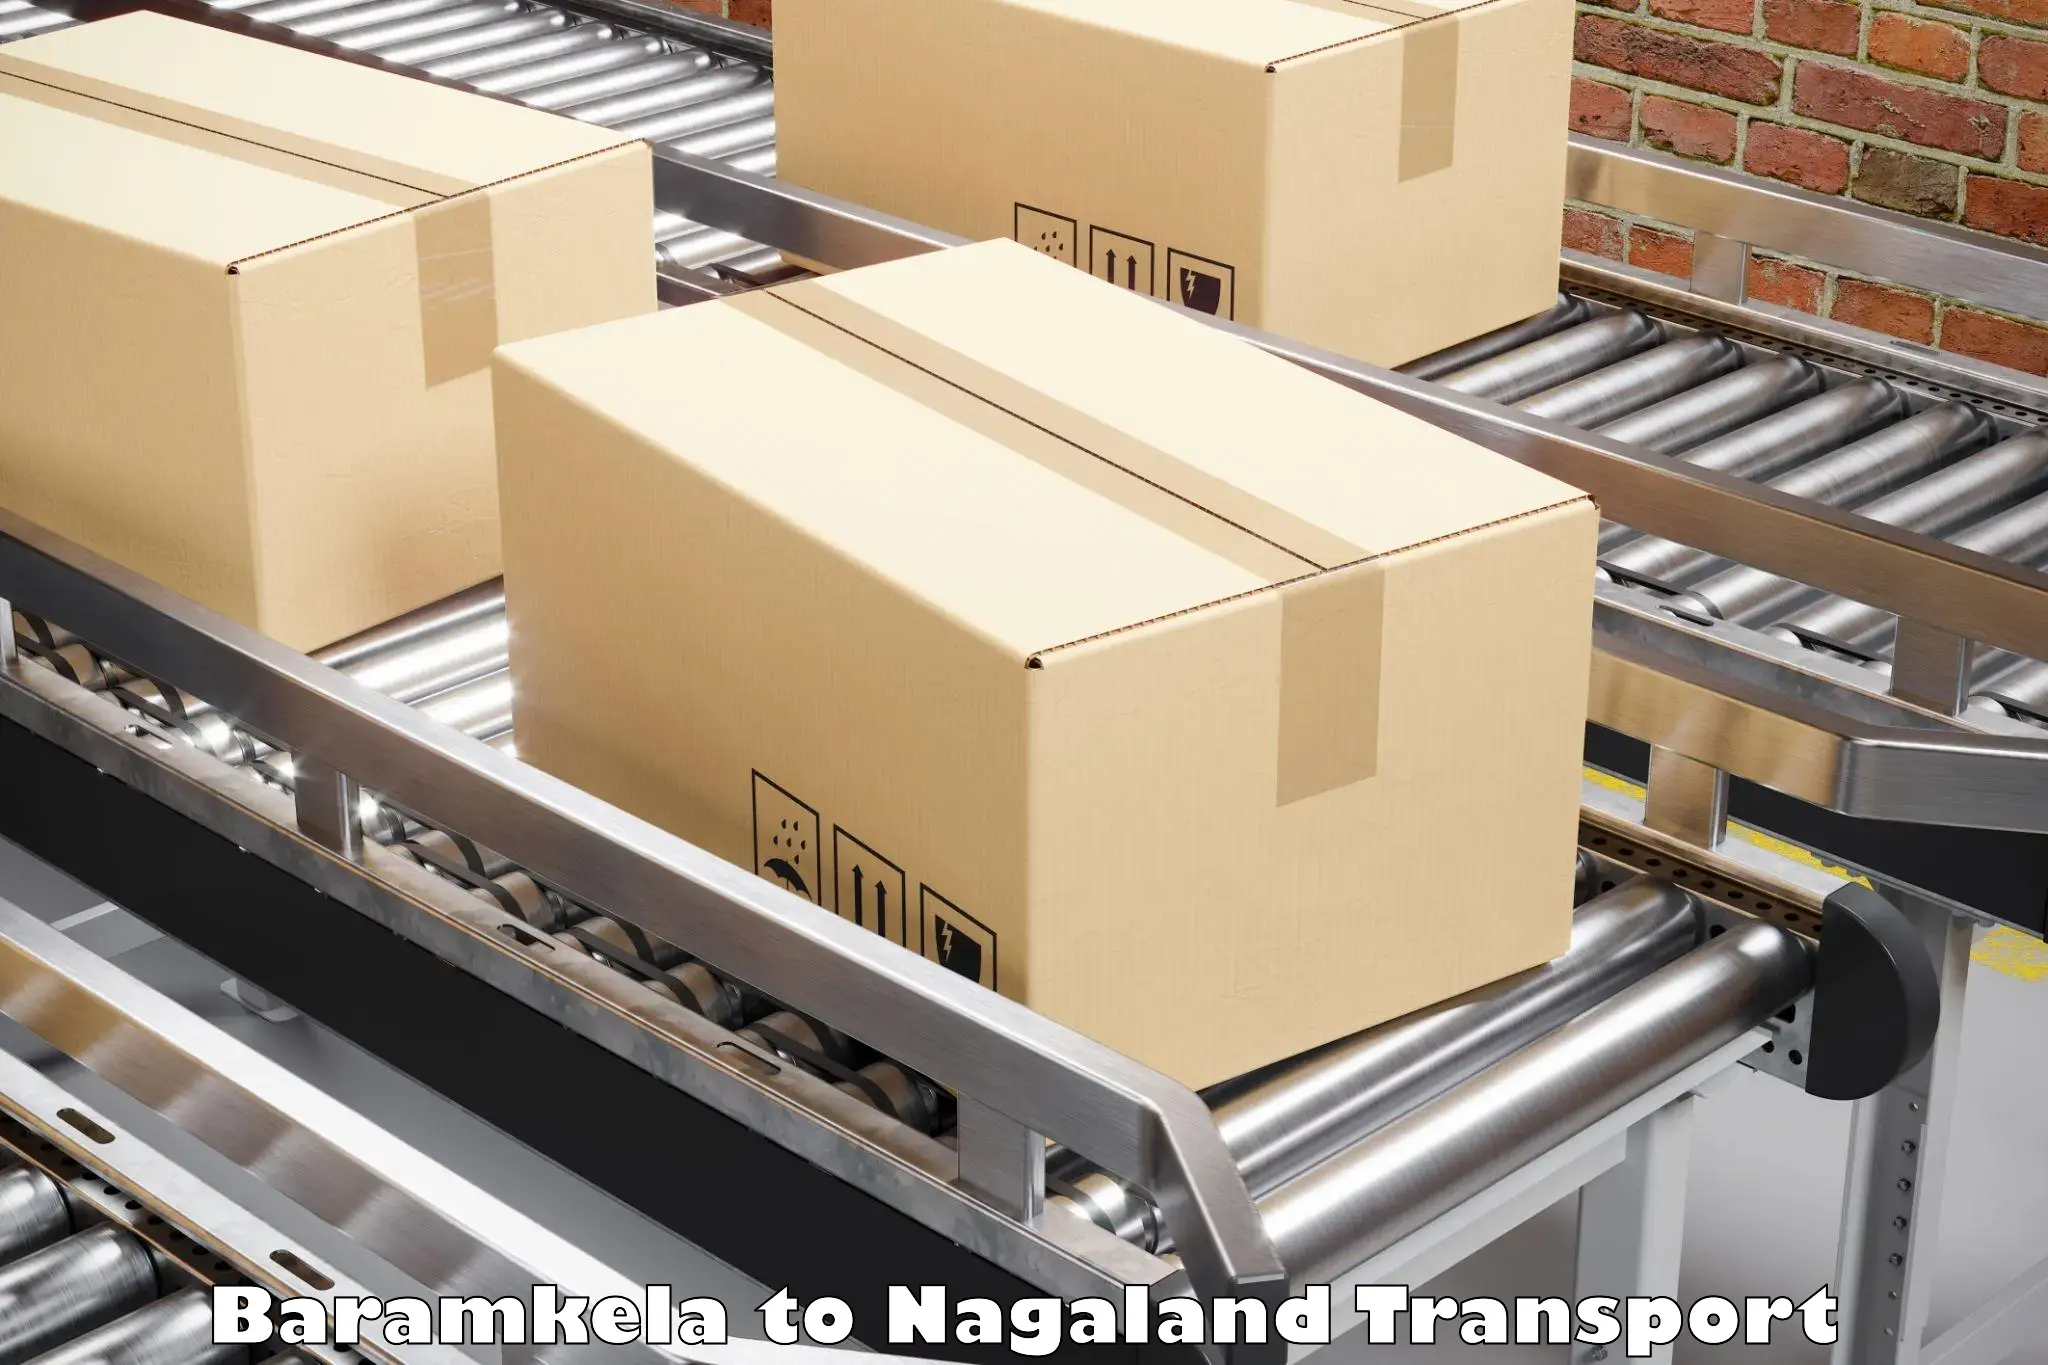 Air freight transport services in Baramkela to Nagaland